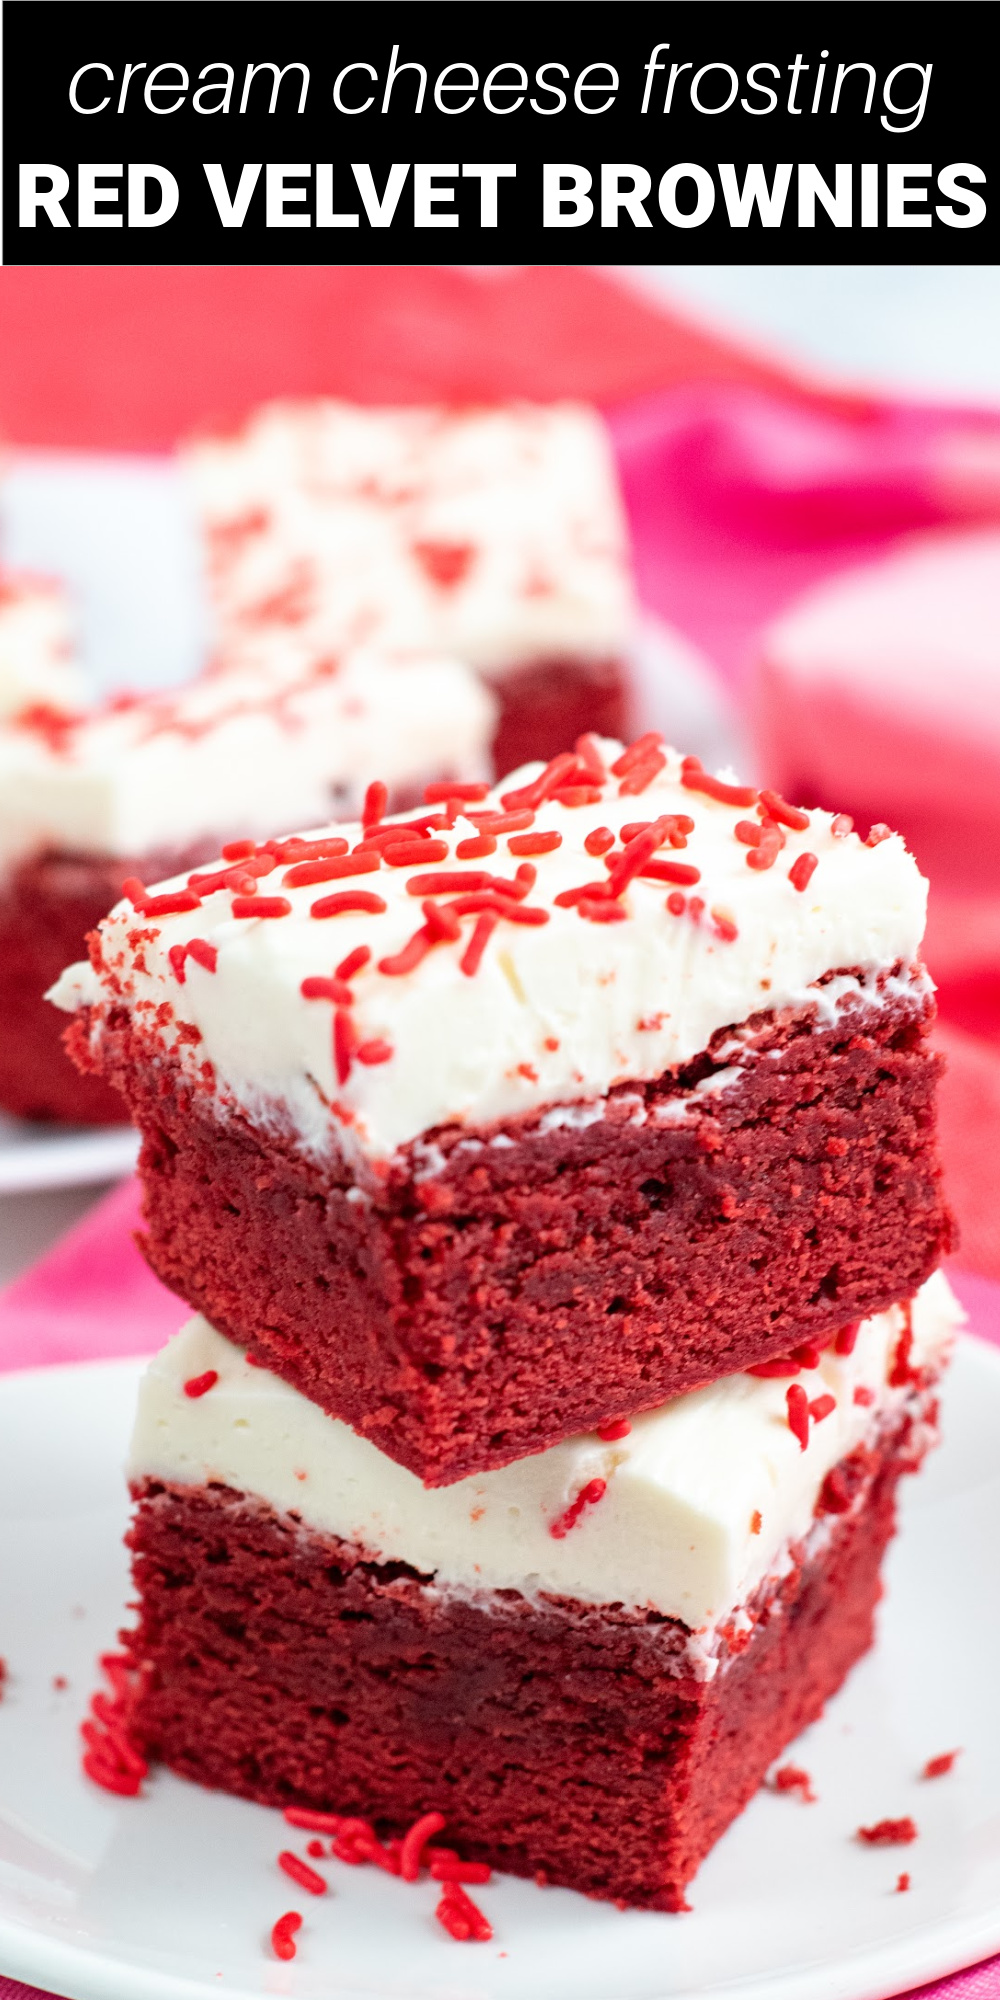 Red velvet brownies with cream cheese frosting are small bites of heaven. These homemade fudgy brownies are made with semi-sweet chocolate chips for the perfect chocolate flavor. Topped with a silky cream cheese frosting these are going to be a special treat.